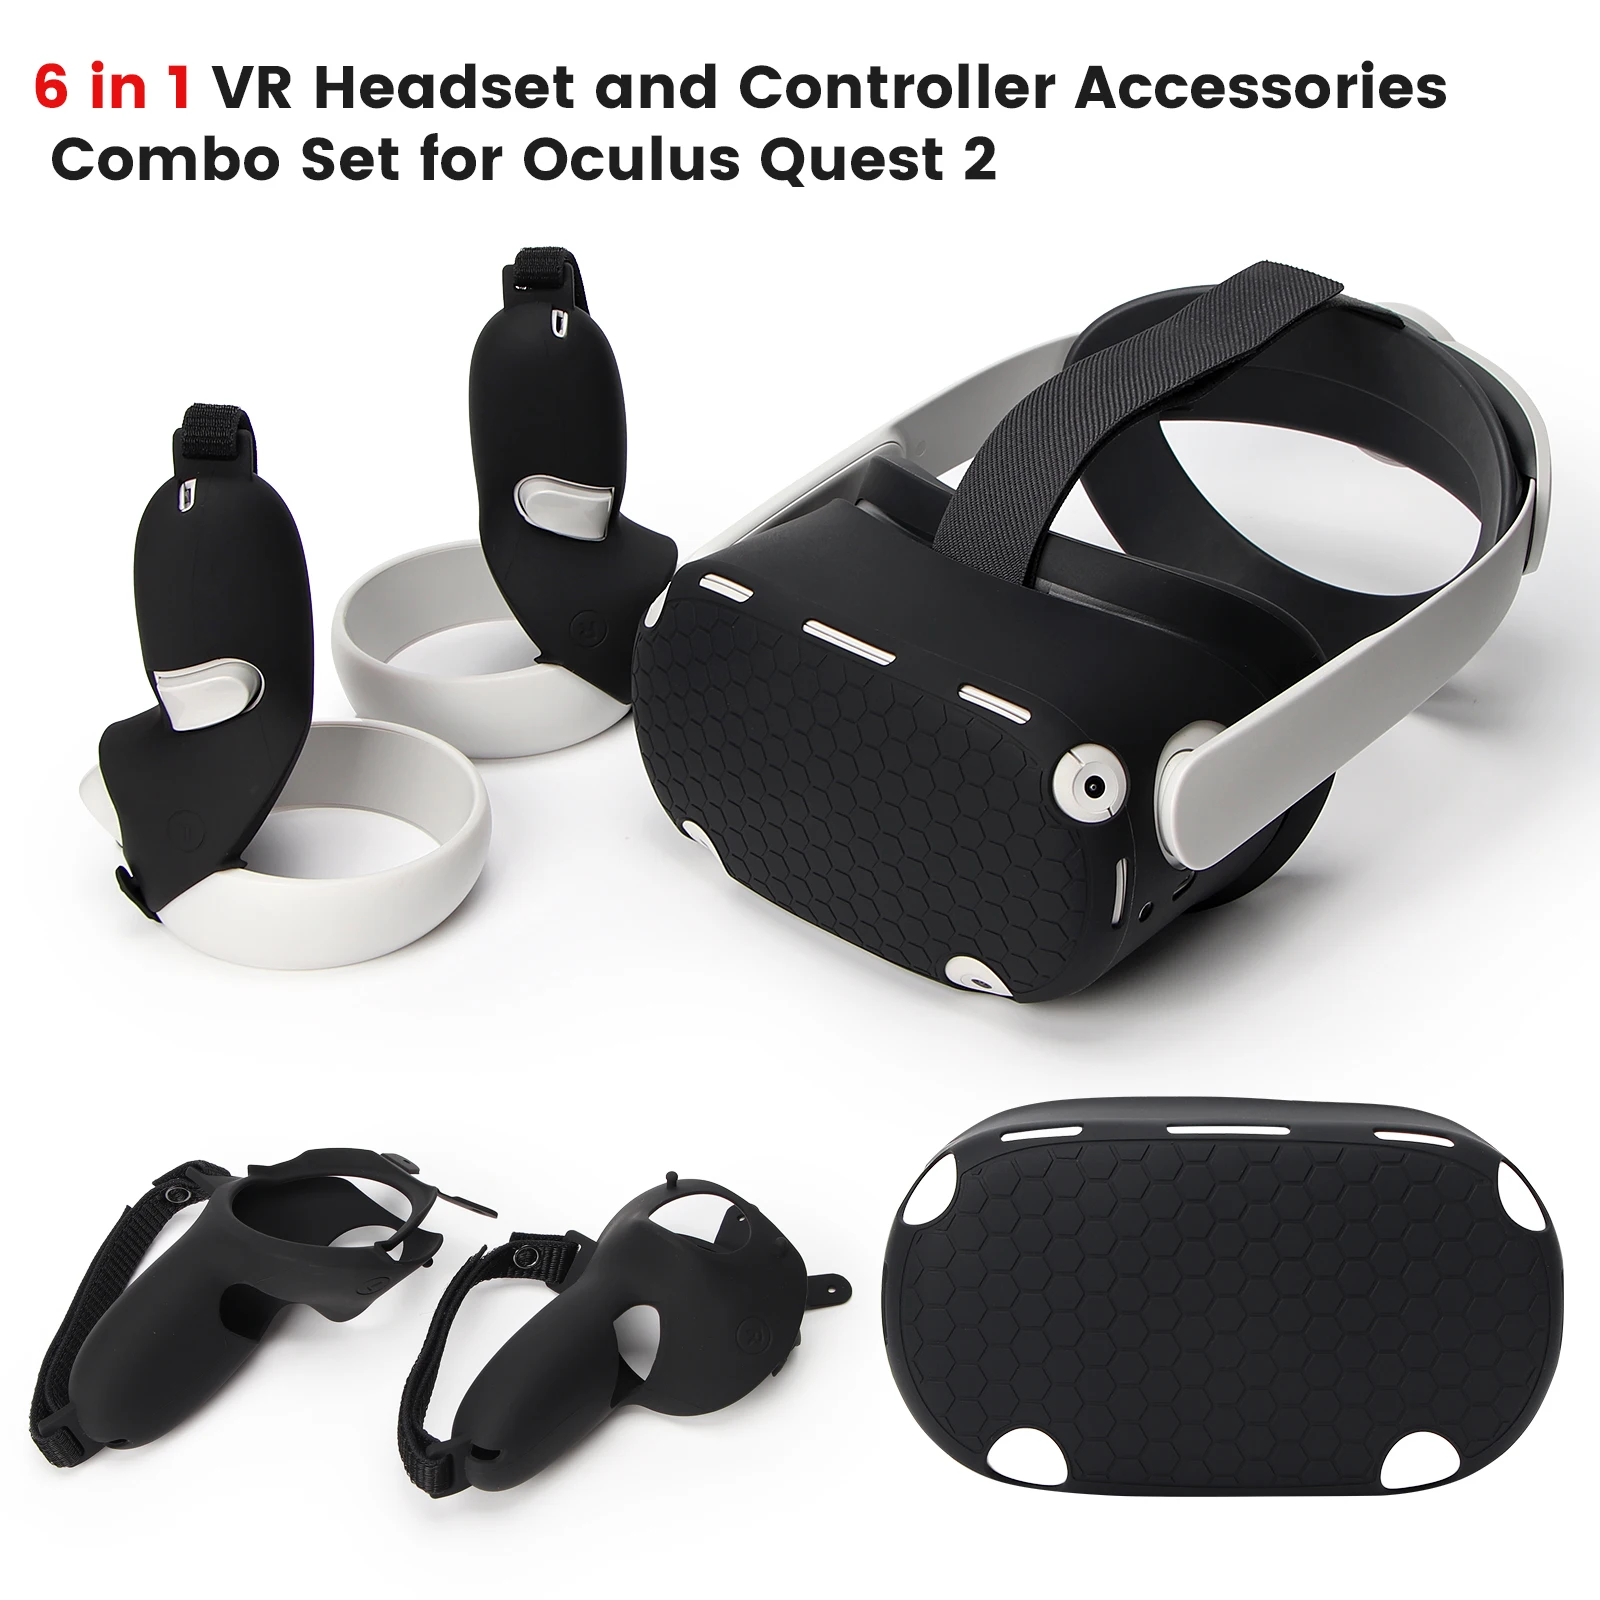 Oculus Quest 2 Case VR Touch Controller Shell Lens Rod Cap Handle Grip Protective Cover Set For Oculus Quest 2 VR Accessories